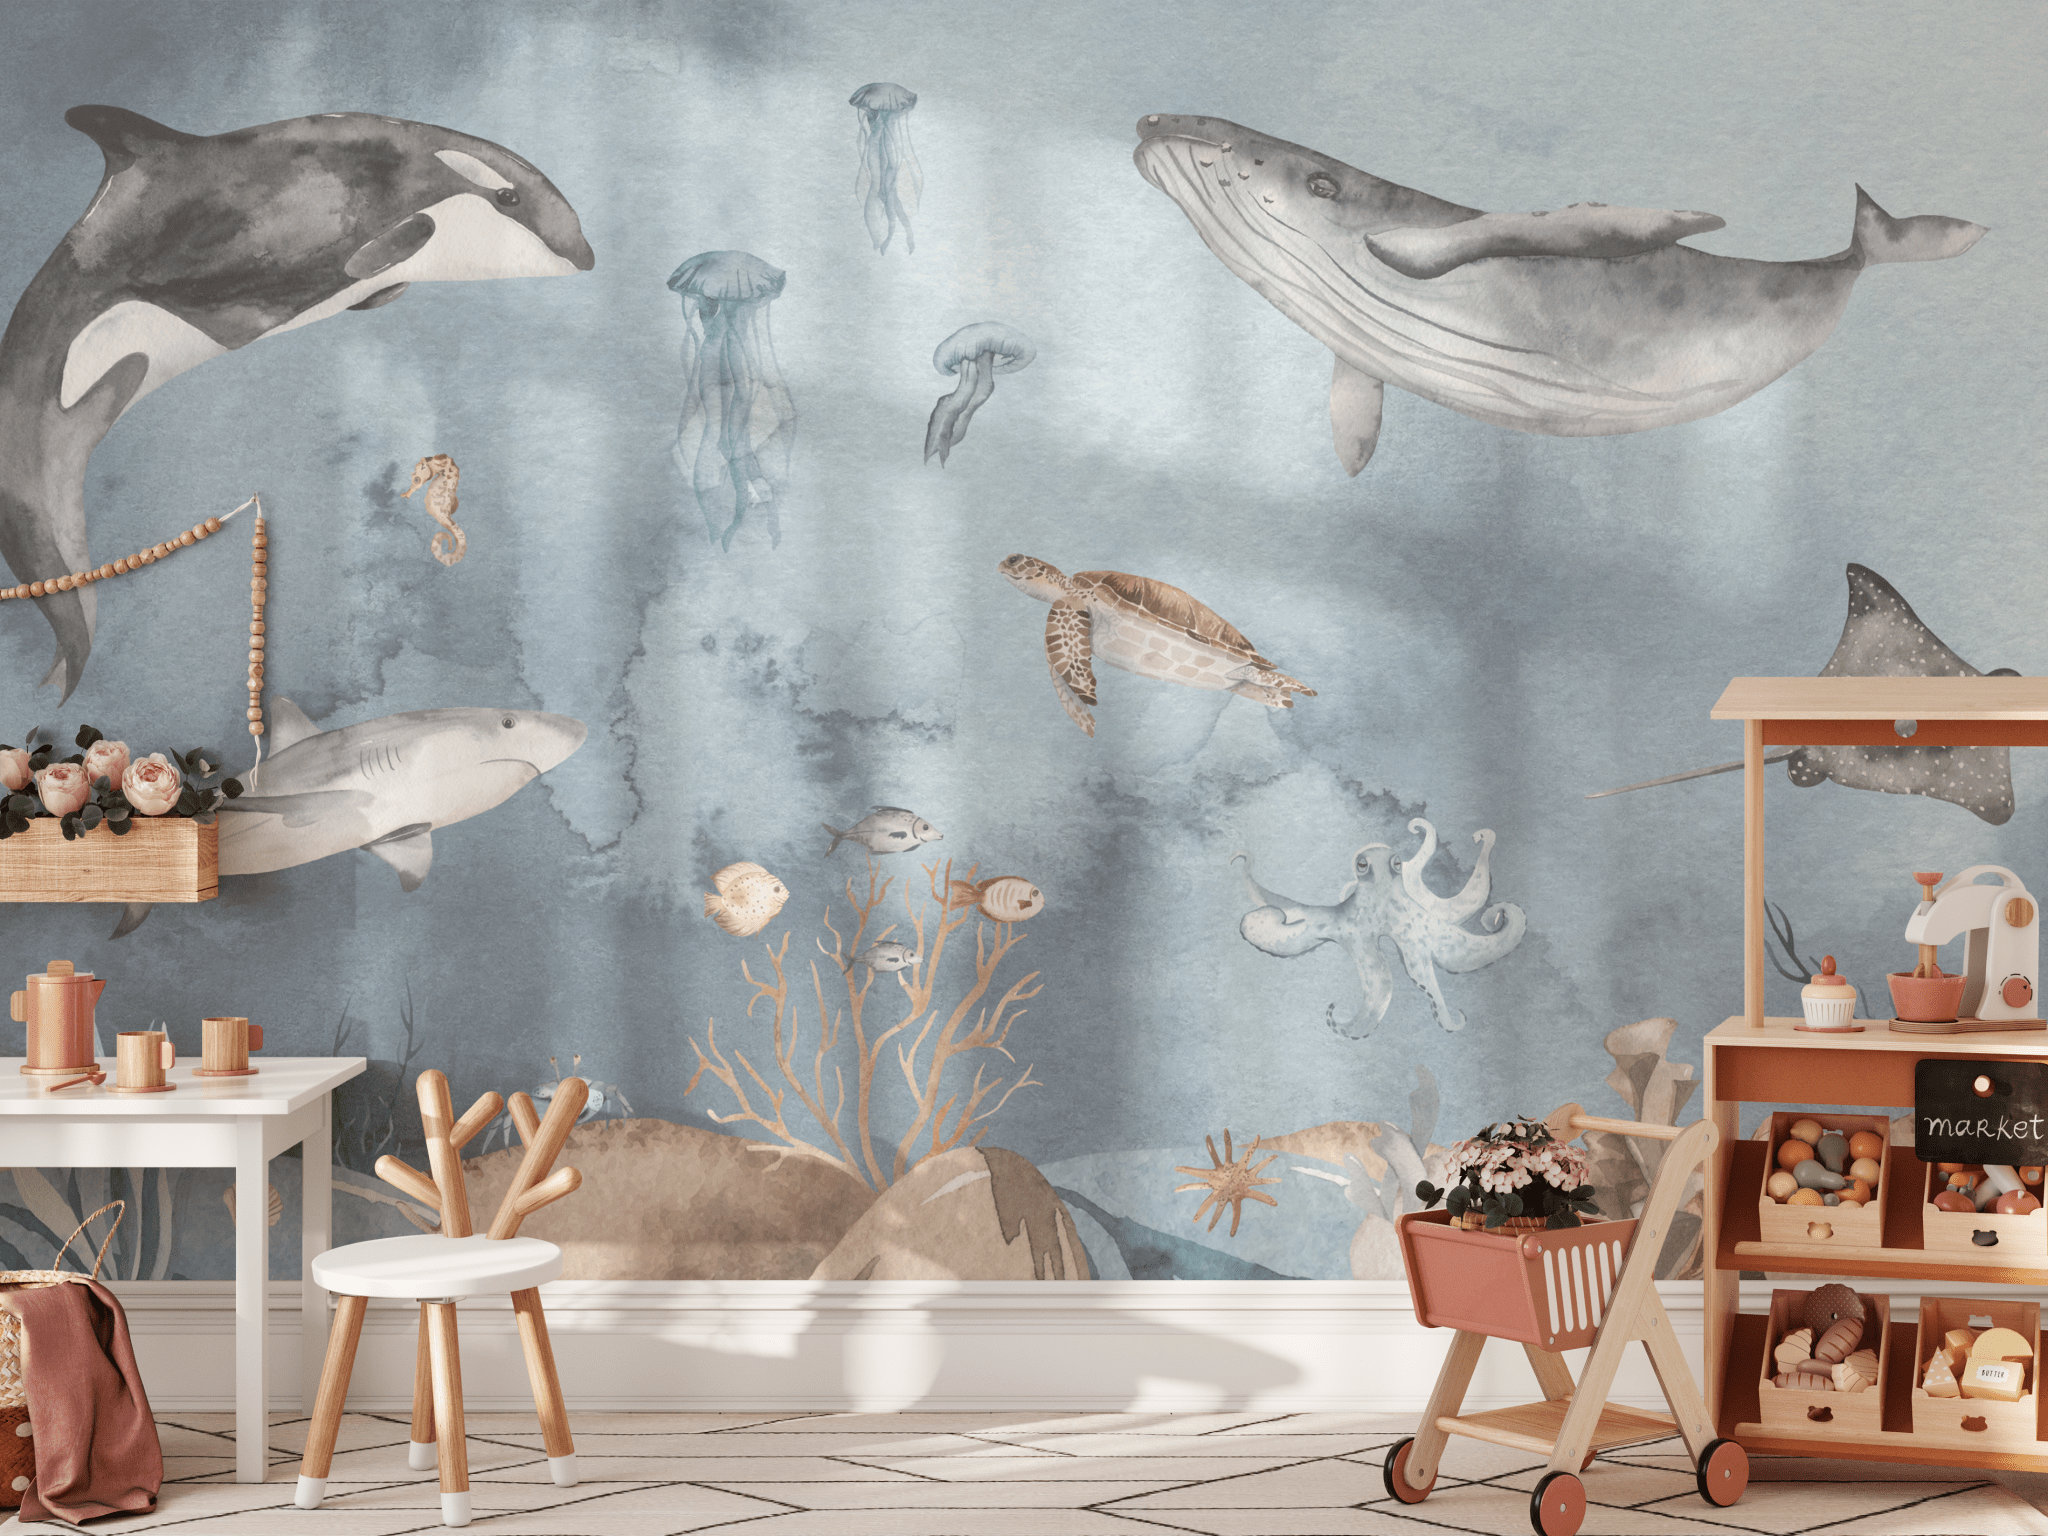 A children's playroom featuring an ocean-themed wall mural. The mural showcases a variety of sea creatures including orcas, sharks, whales, jellyfish, sea turtles, and an octopus, all painted in a soft watercolor style. The room is furnished with a small white table, wooden chairs, and a toy cart filled with plush toys and children's books, enhancing the marine nursery decor.